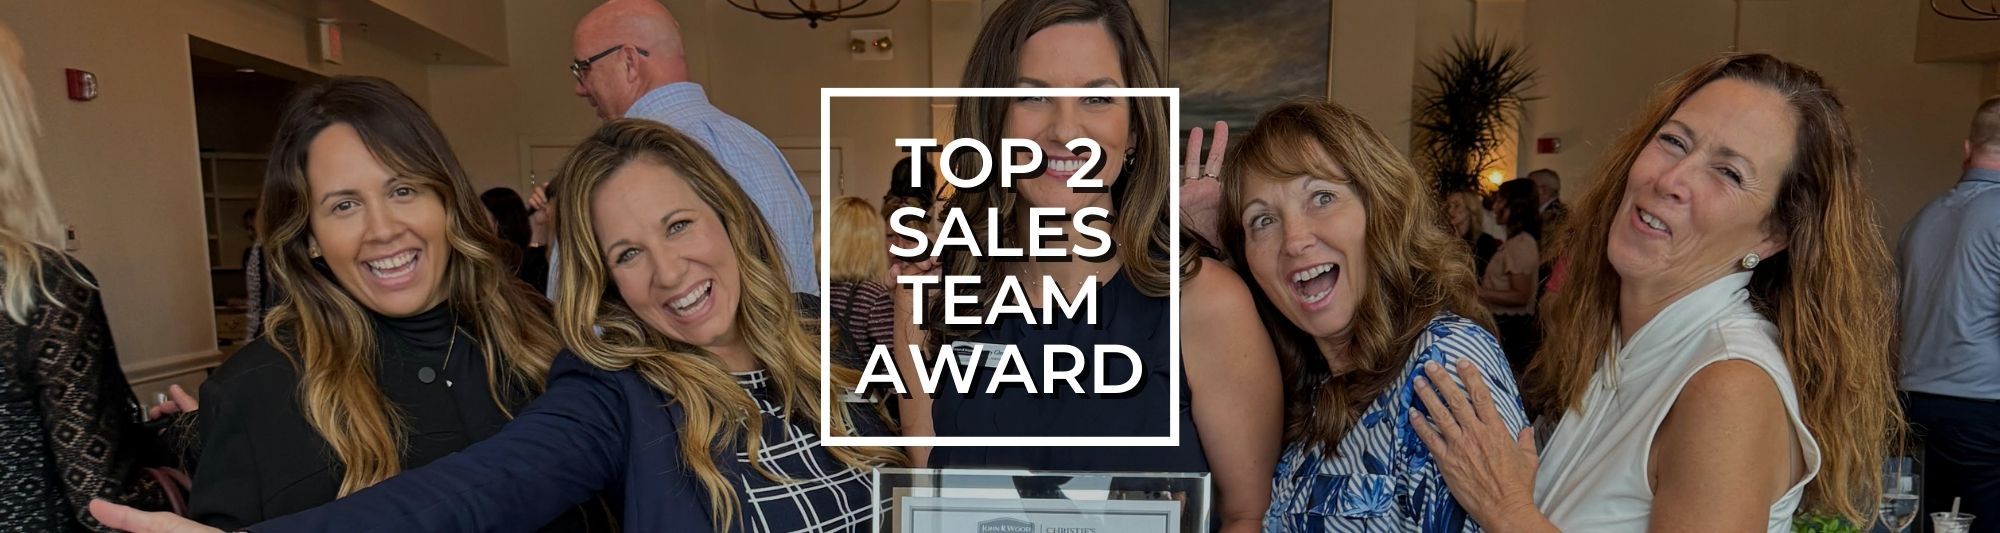 WP photo of the No. 2 Sales Team Award received by Top Agent Team Florida